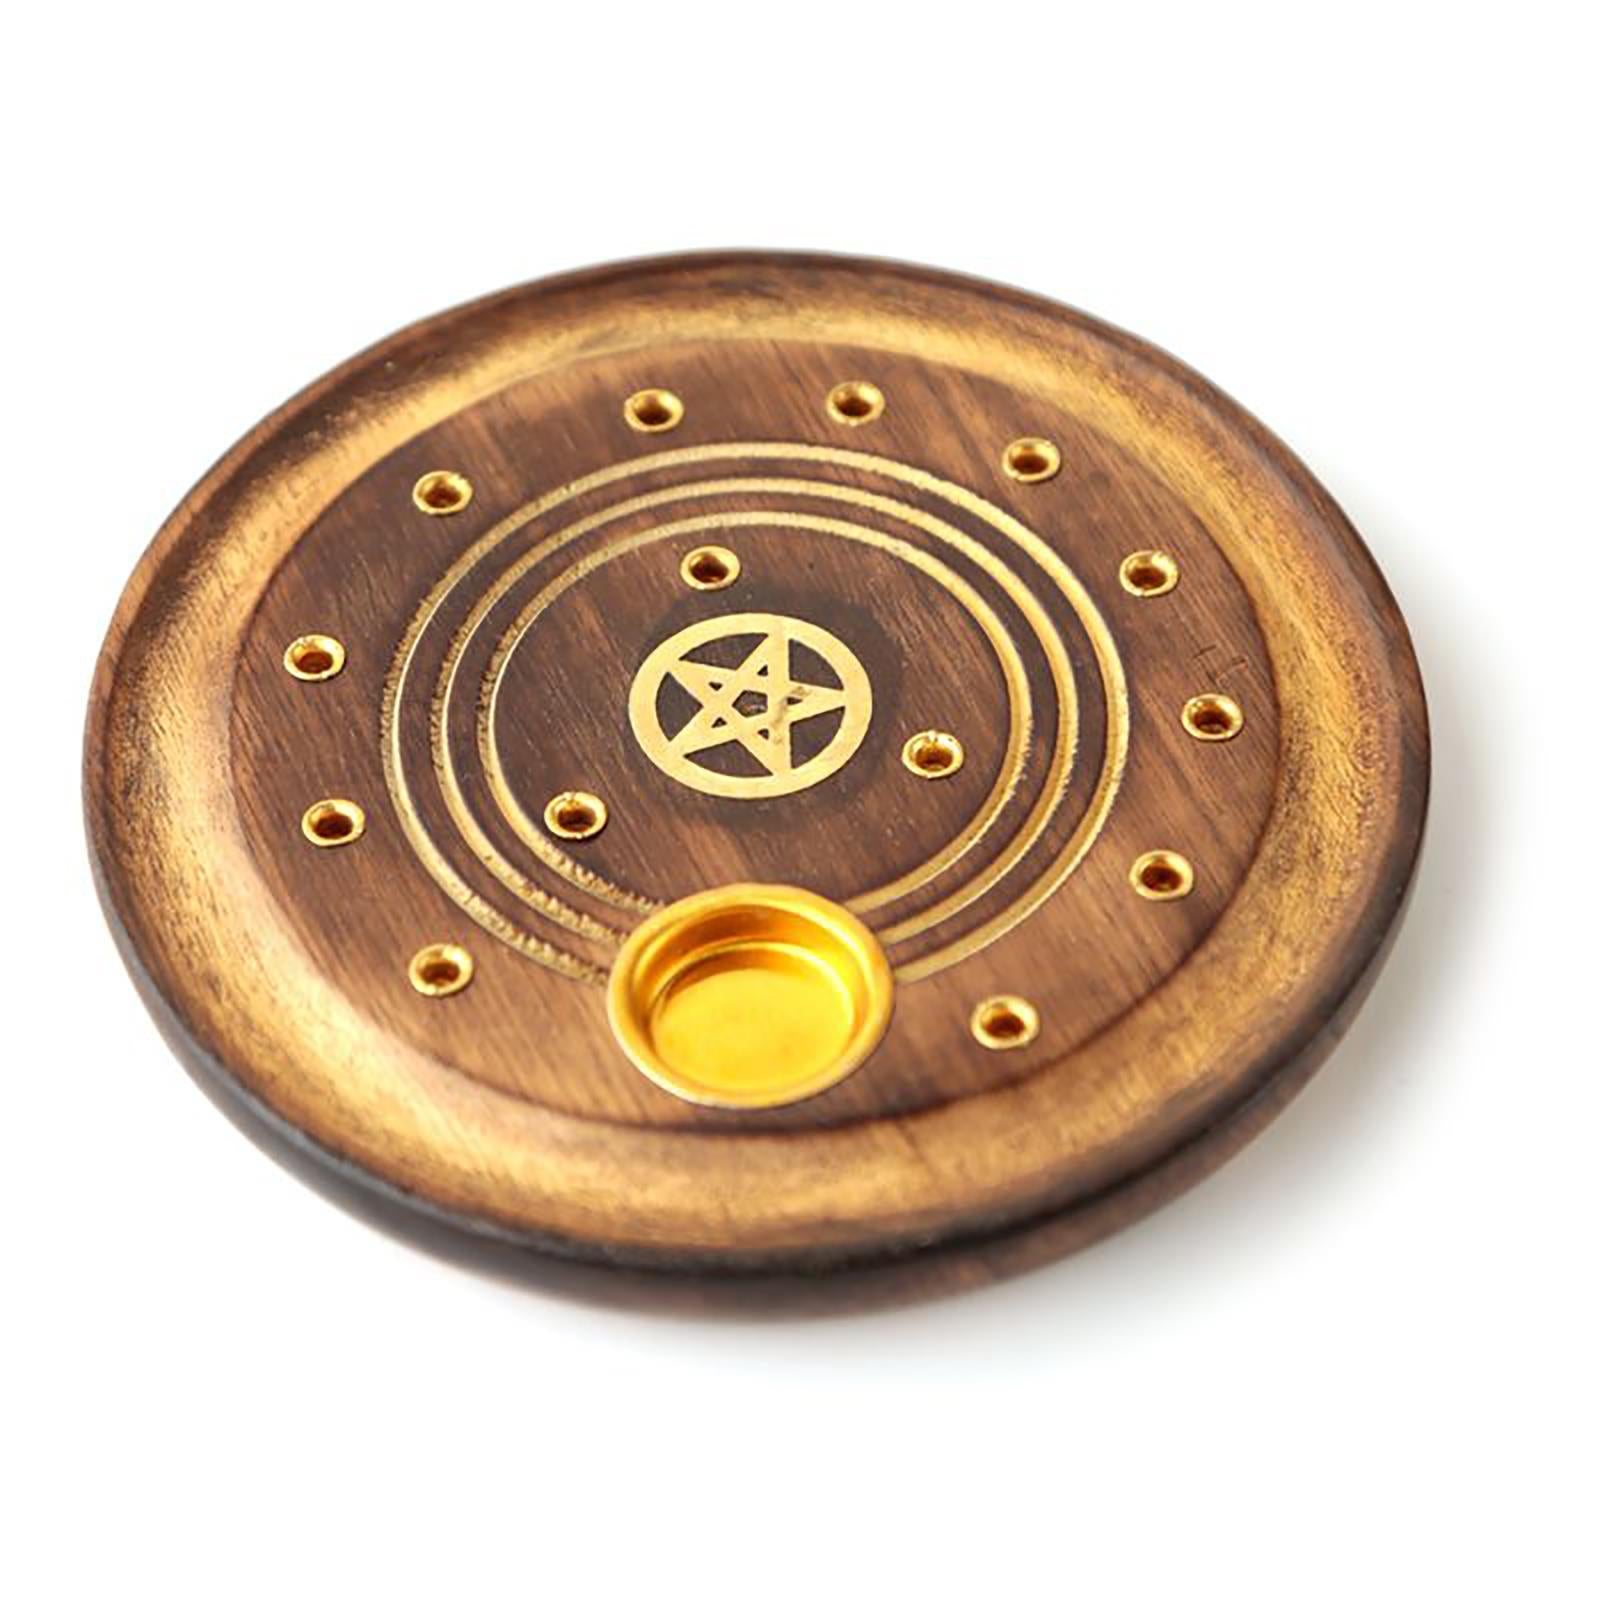 Made from mango wood, this incense holder has room for cones or sticks. Designed with a brass pentacle inlay within the centre.  Material: Wood Size: H: 1cm W: 10cm D: 10cm